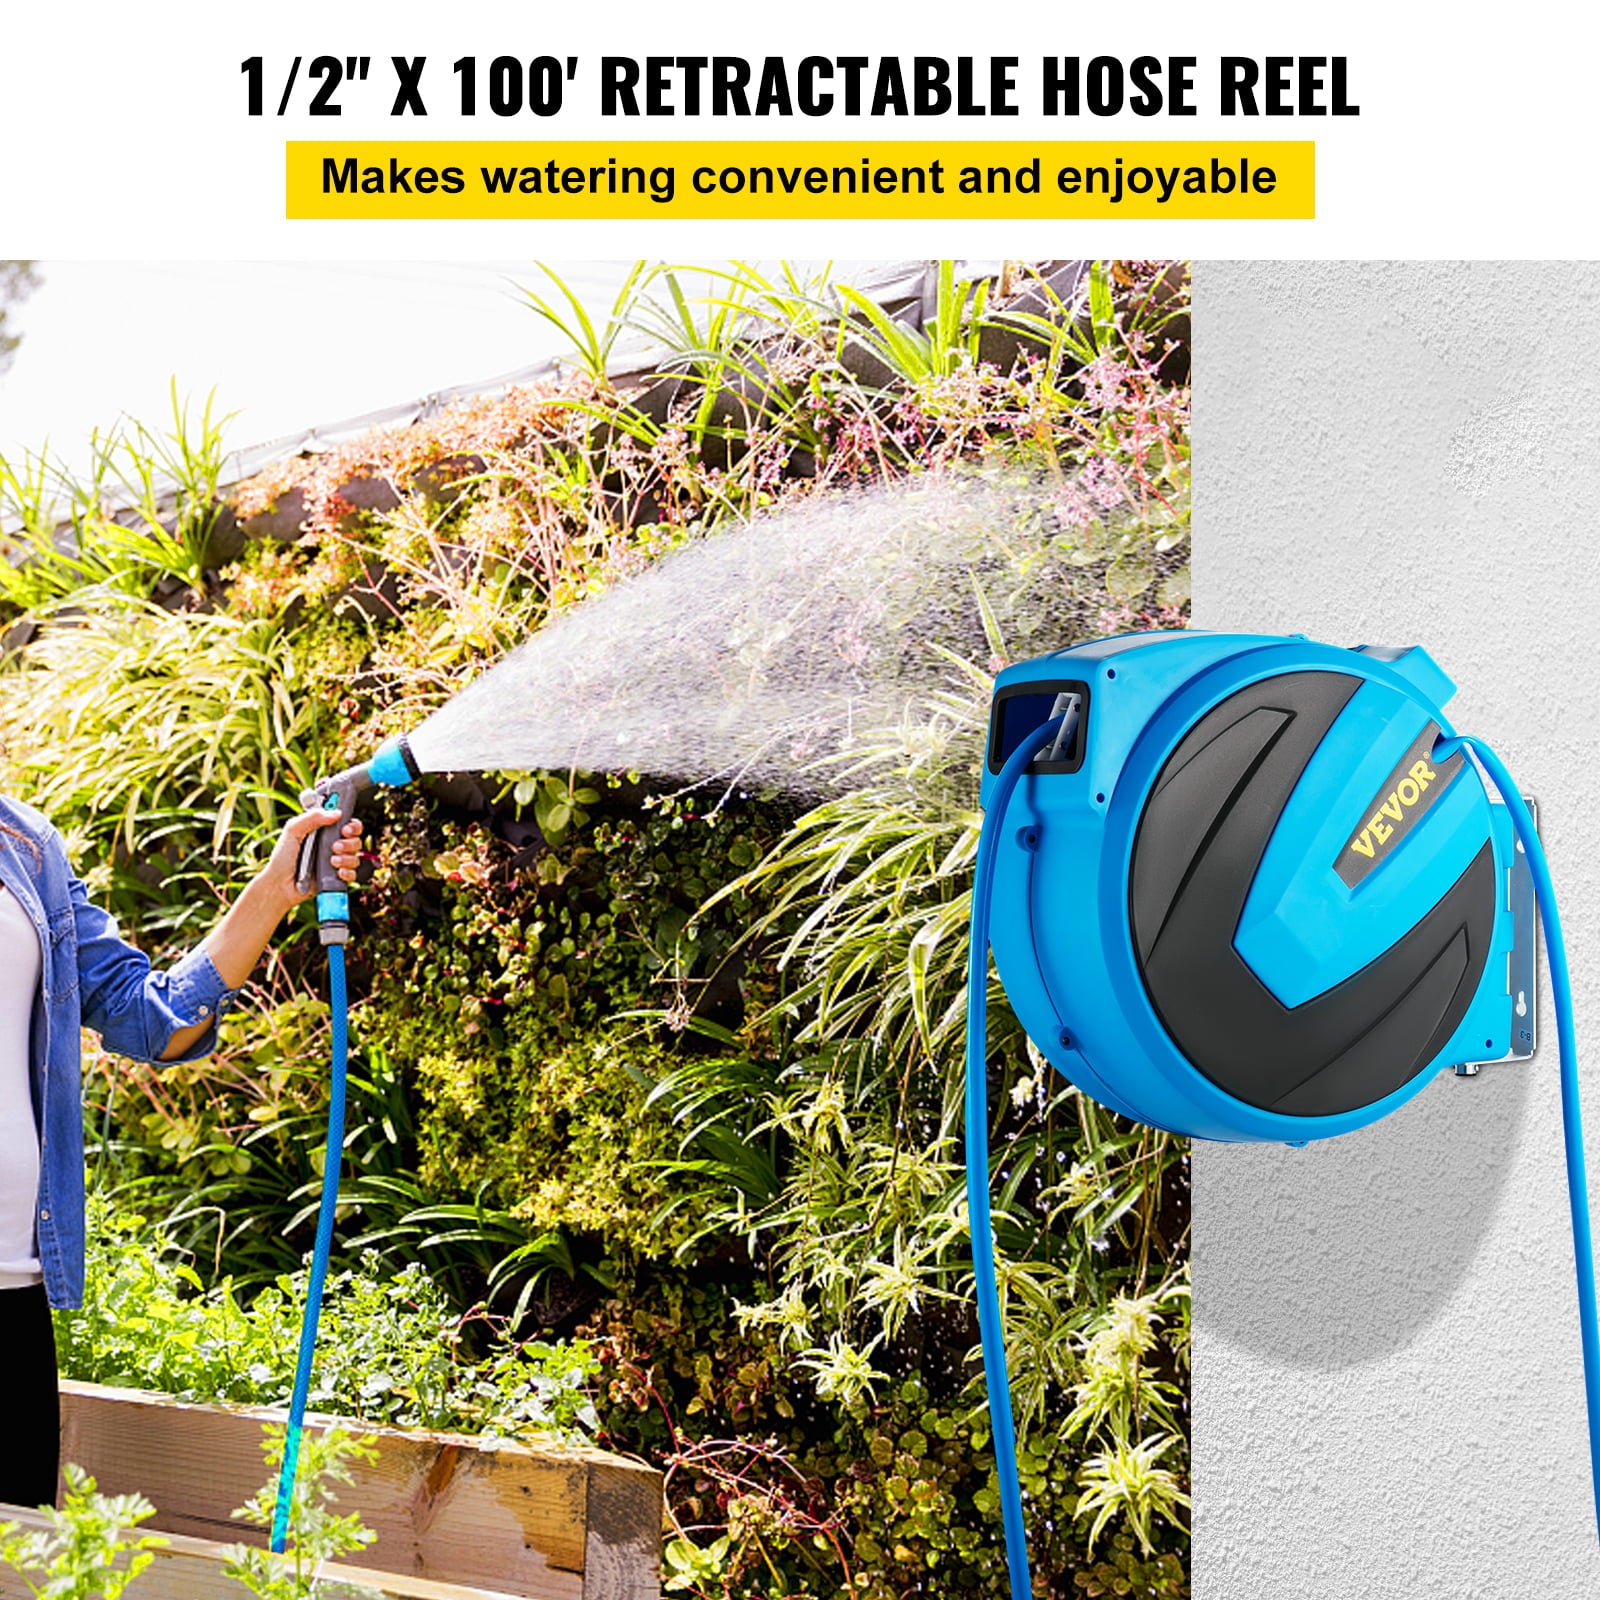 VEVOR Retractable Hose Reel， 1/2 inch x 100 ft， Any Length Lock and Automatic Rewind Water Hose， Wall Mounted Garden Hose Reel With 180° Swivel Bracket and 8 Pattern Hose Nozzle， Blue